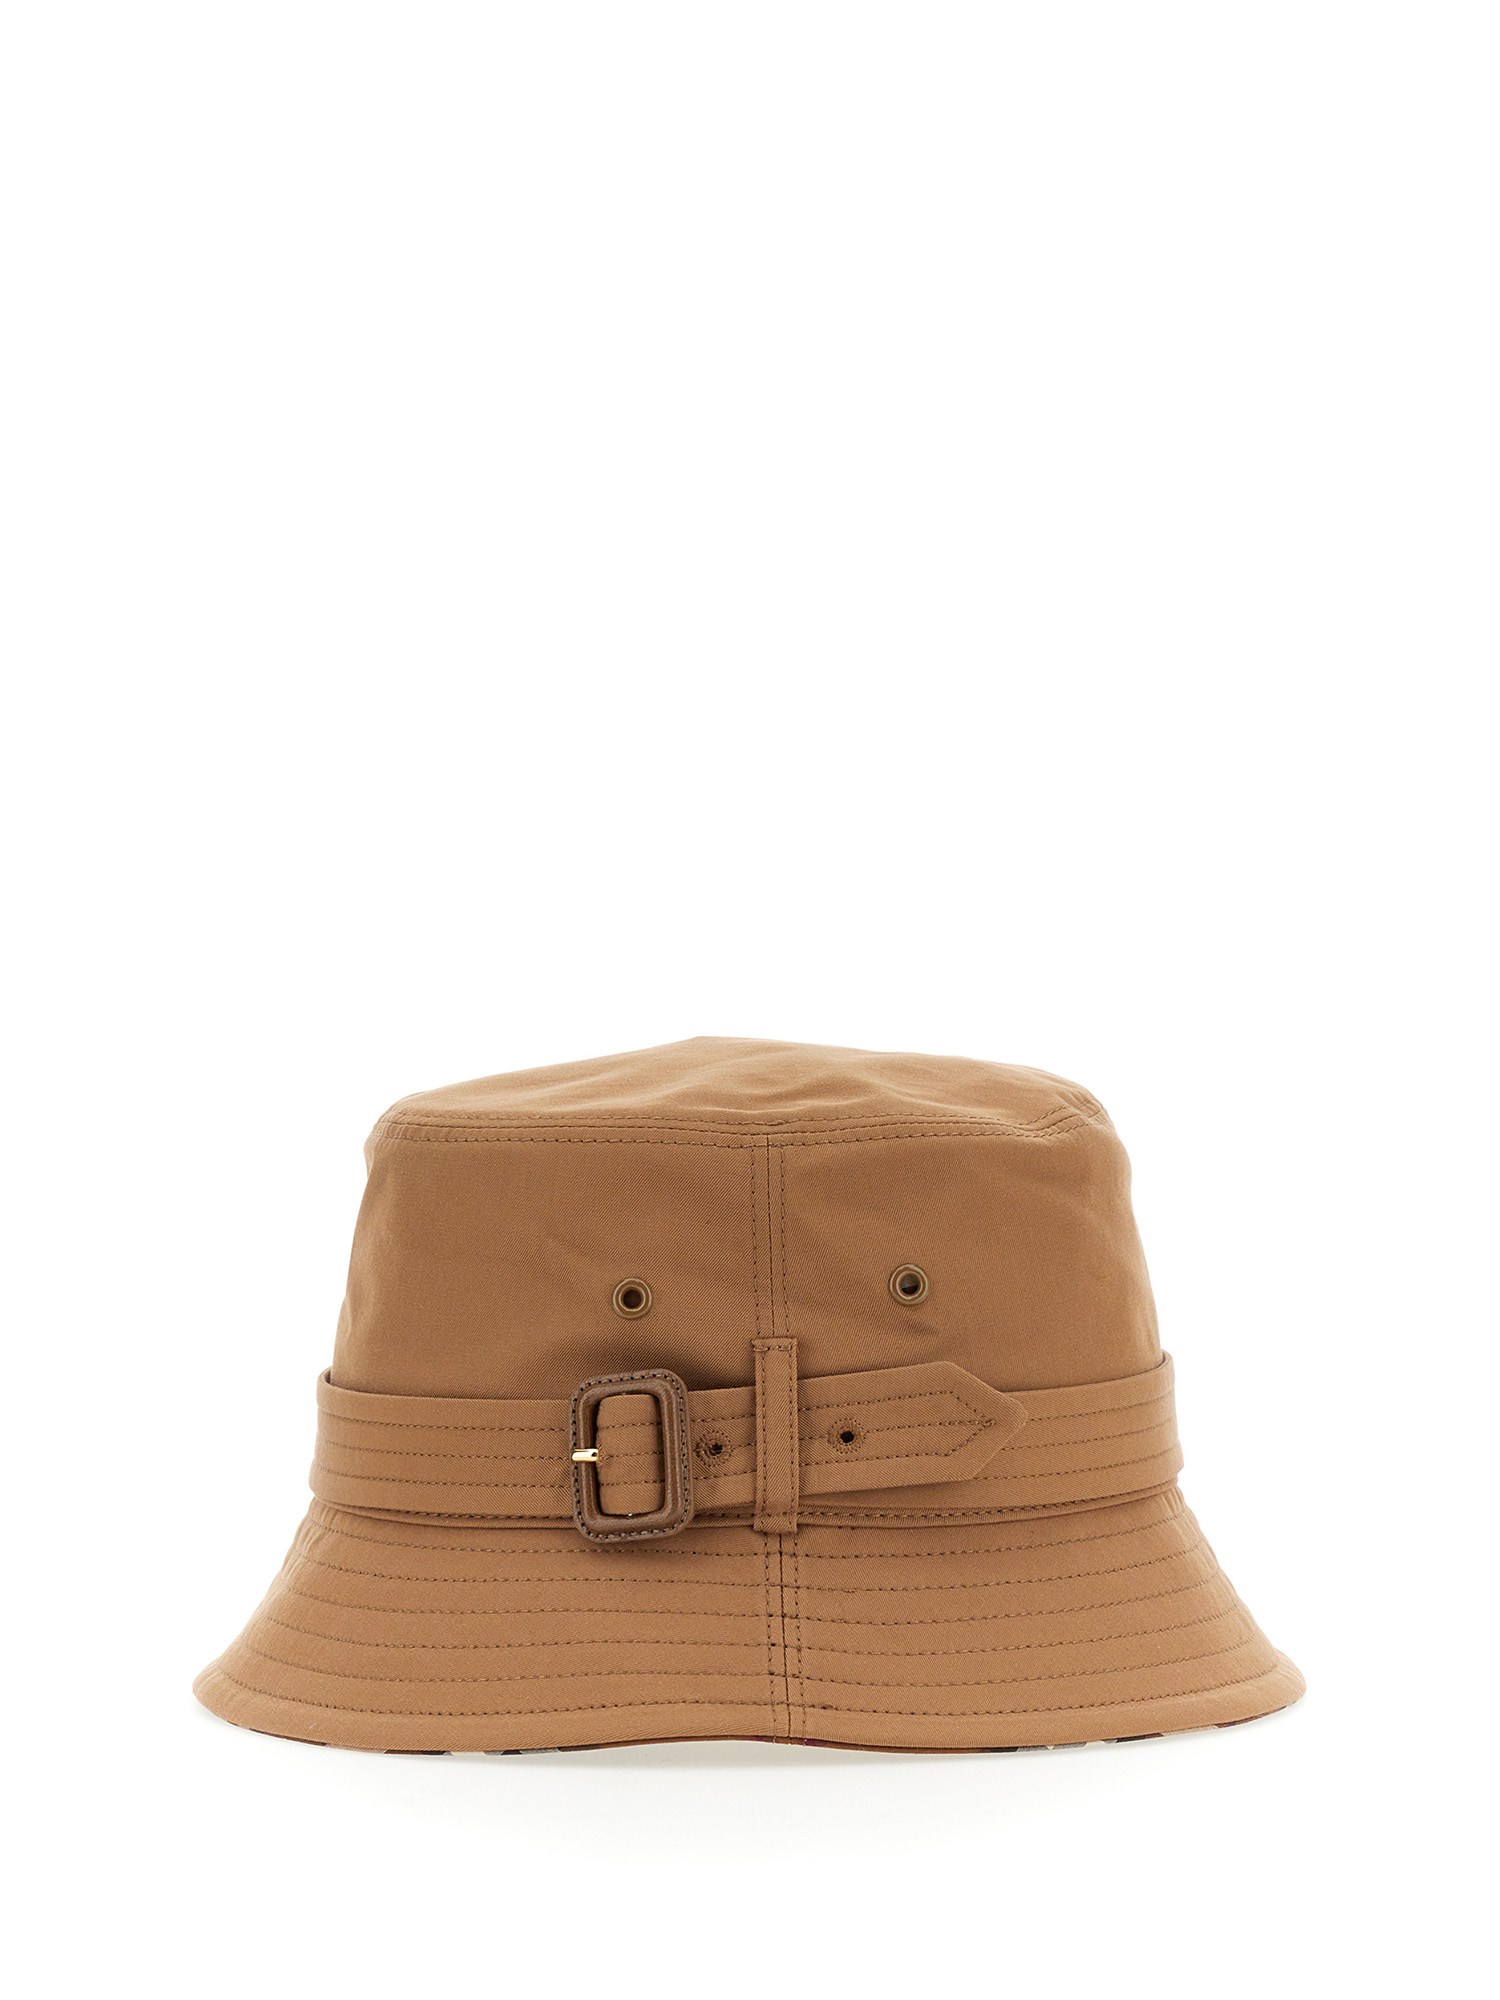 burberry fisherman's hat with belt